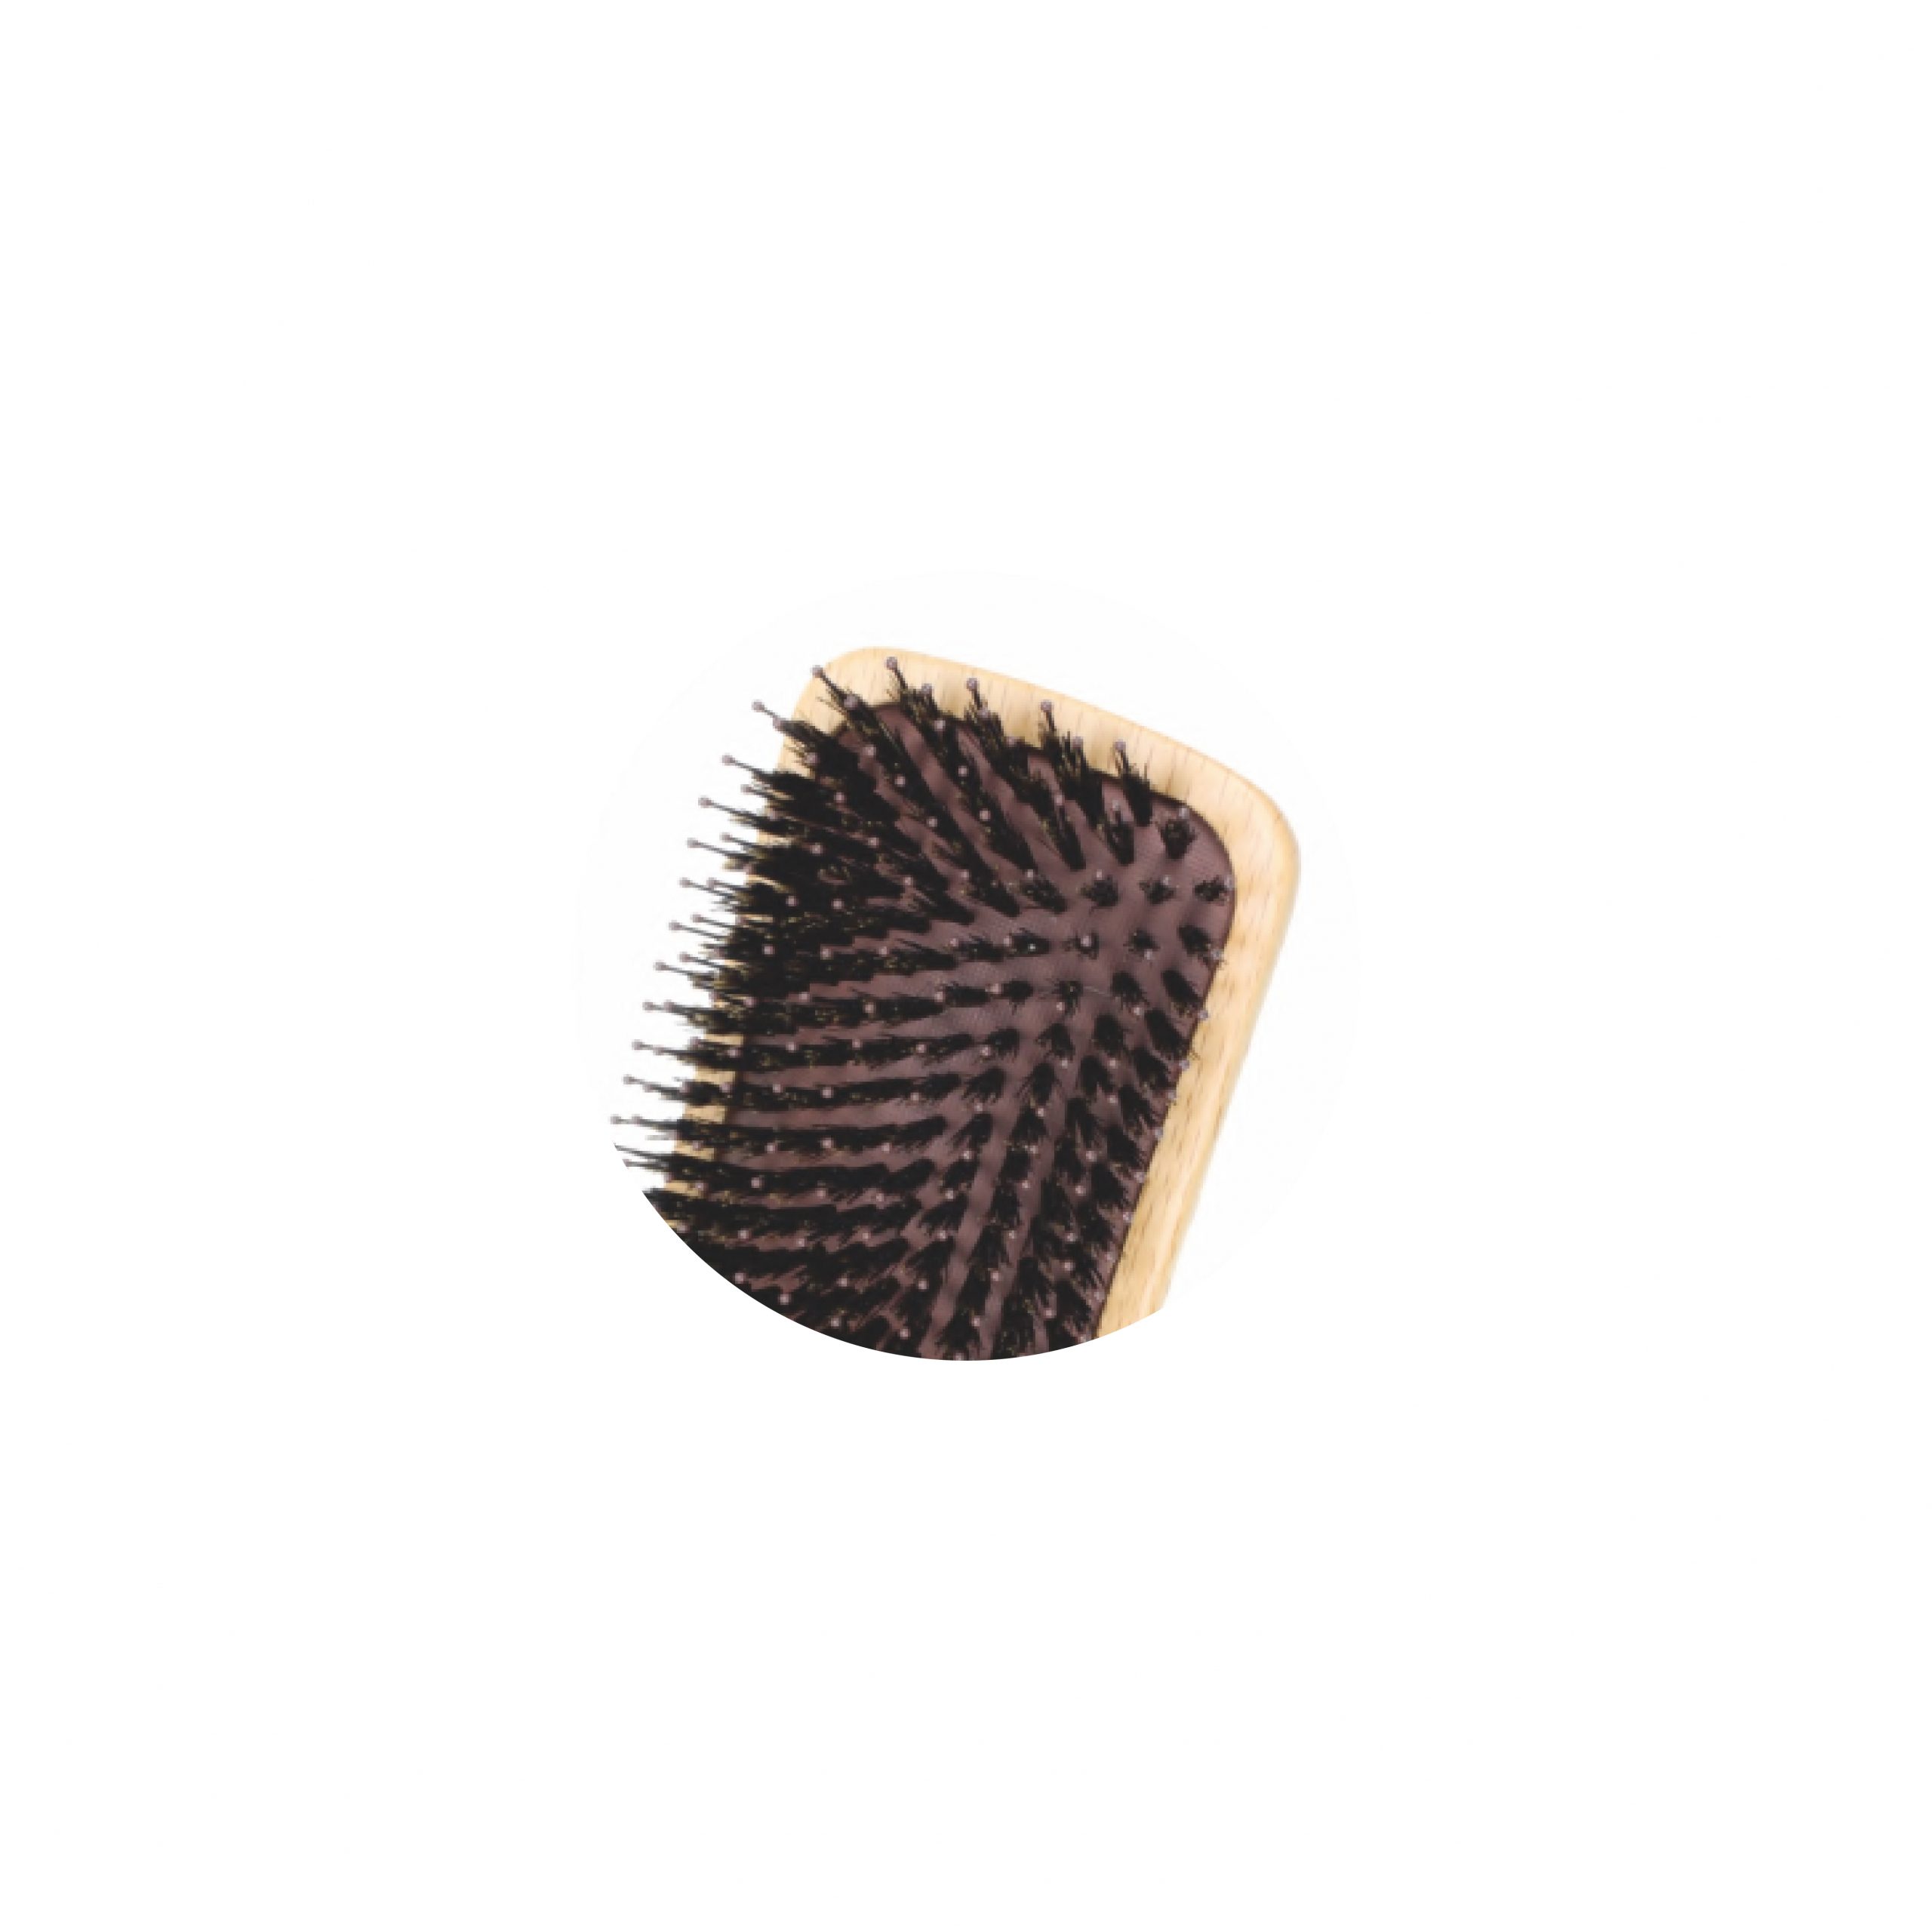 31-6294011581168-IQ-58116 IQUEEN LARGE OVAL CUSHION BRUSH-3